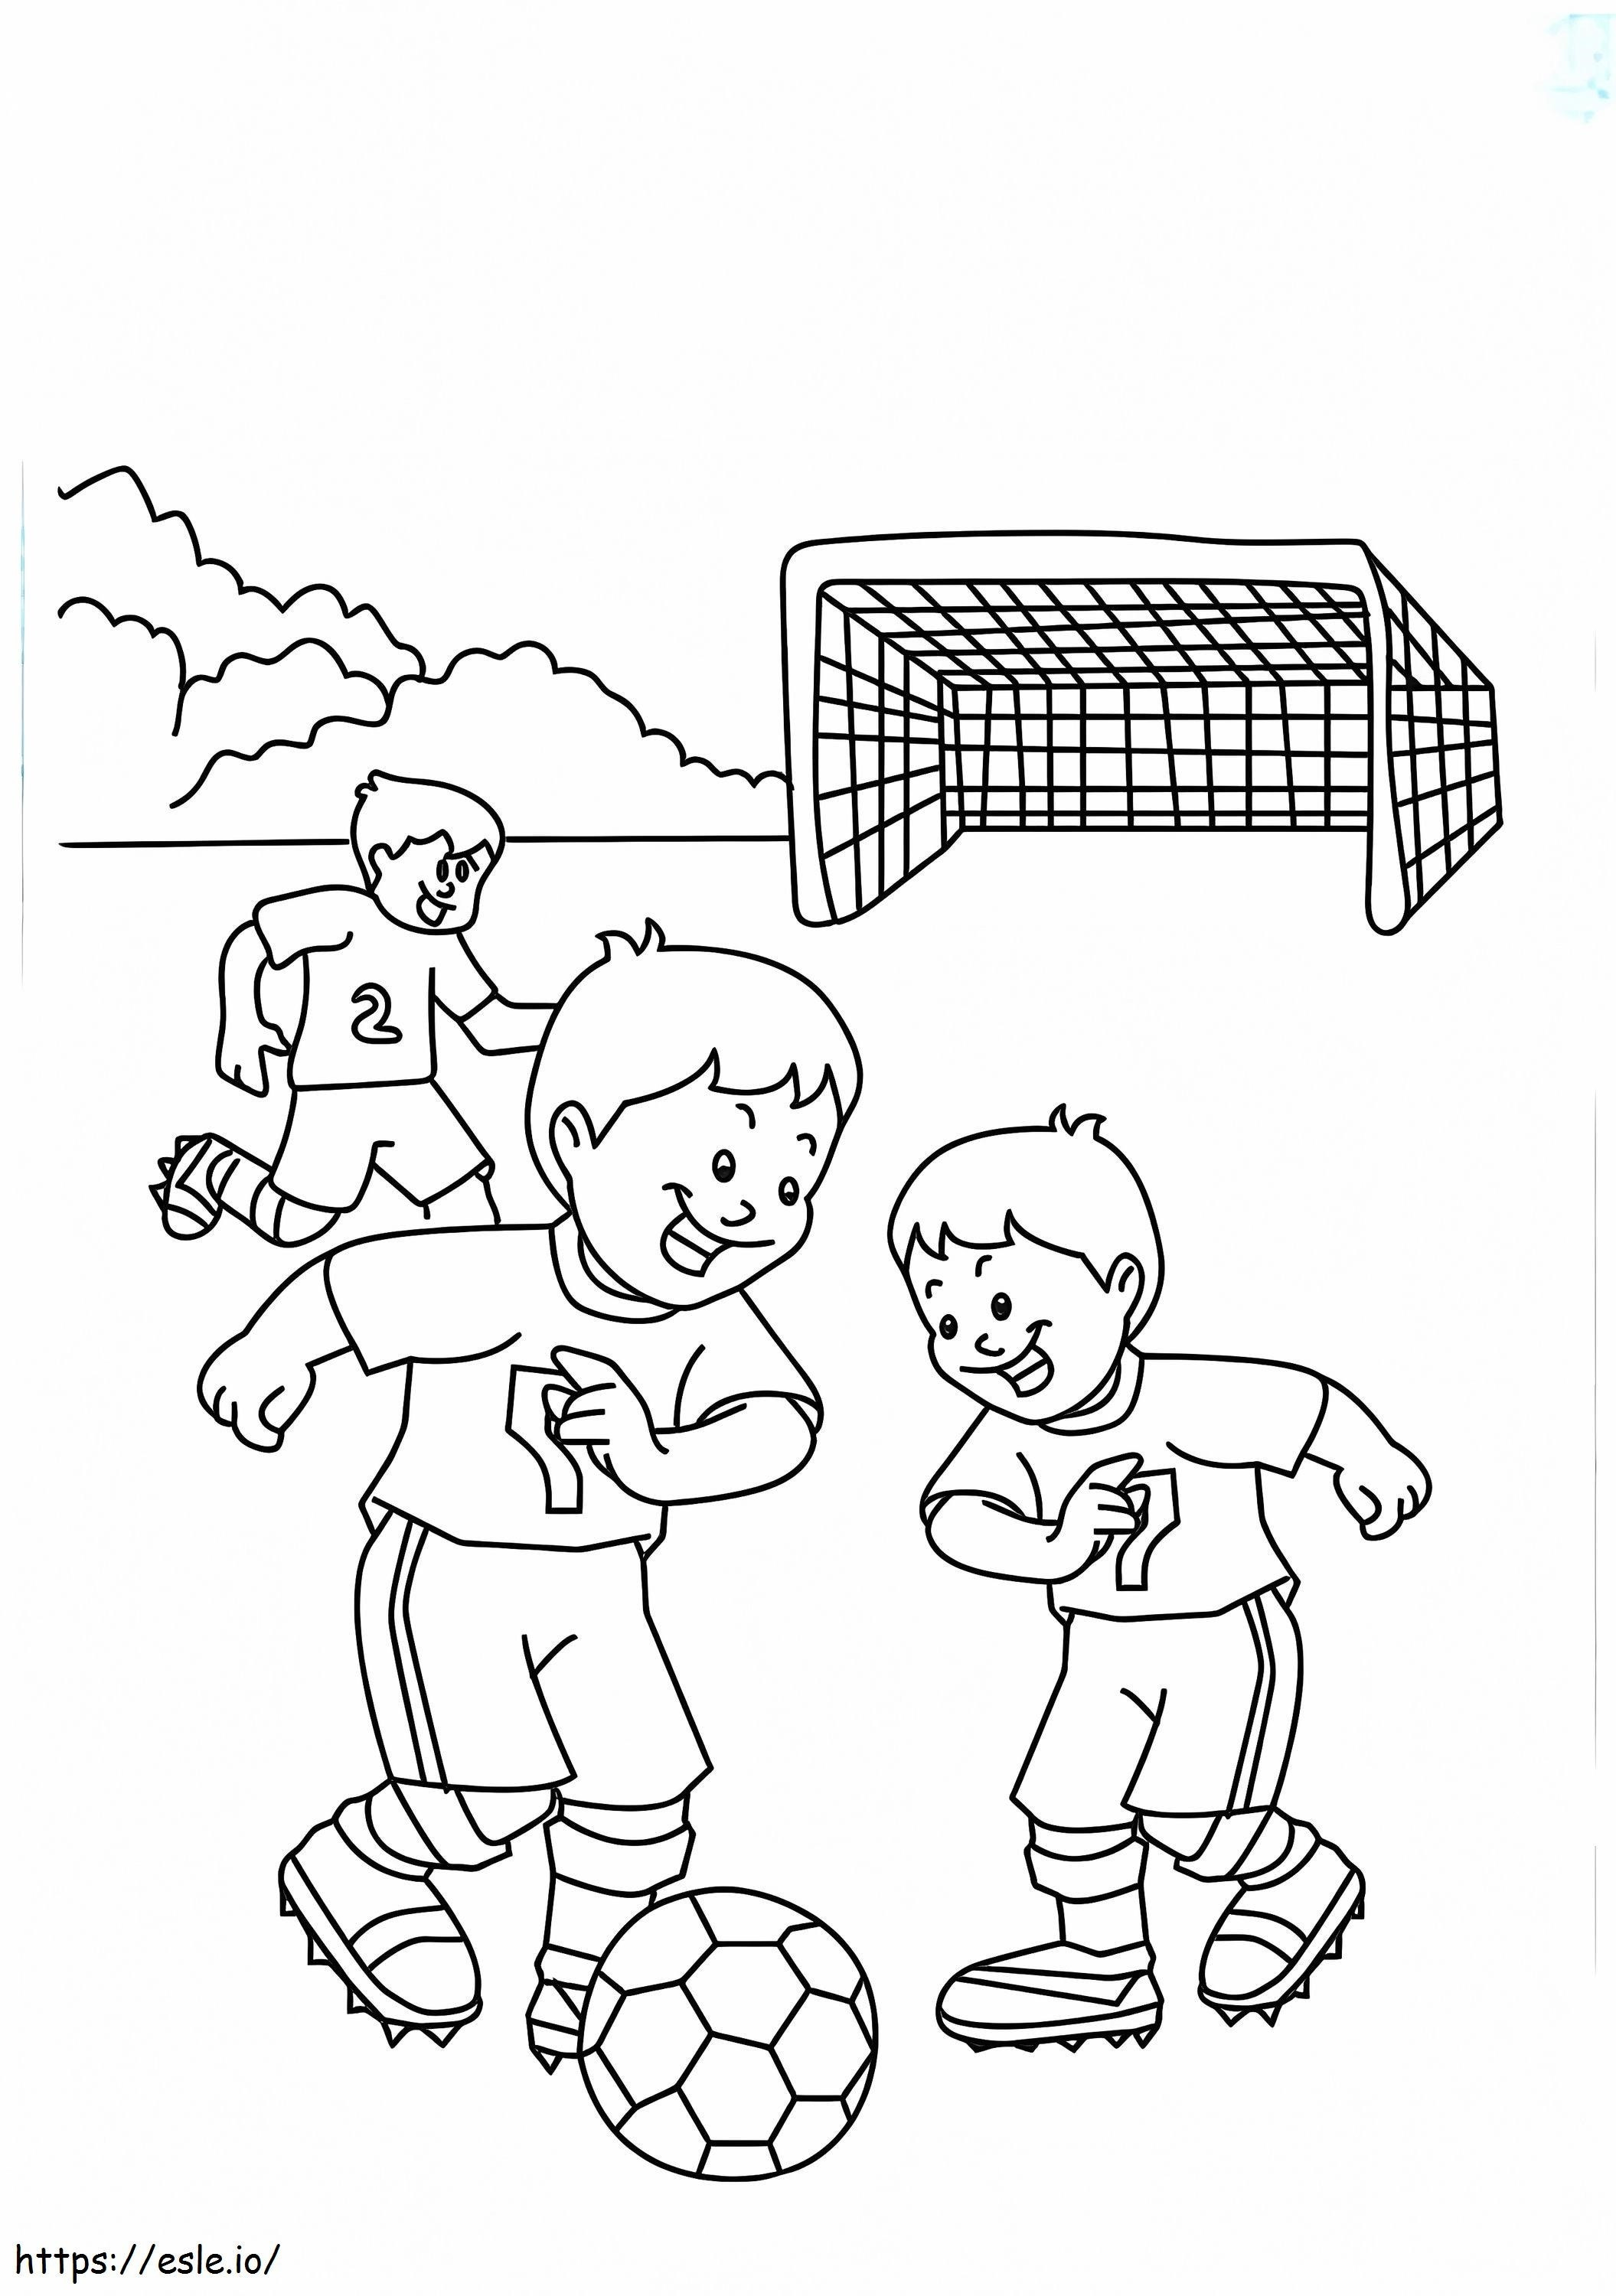 Three Children Playing Soccer coloring page